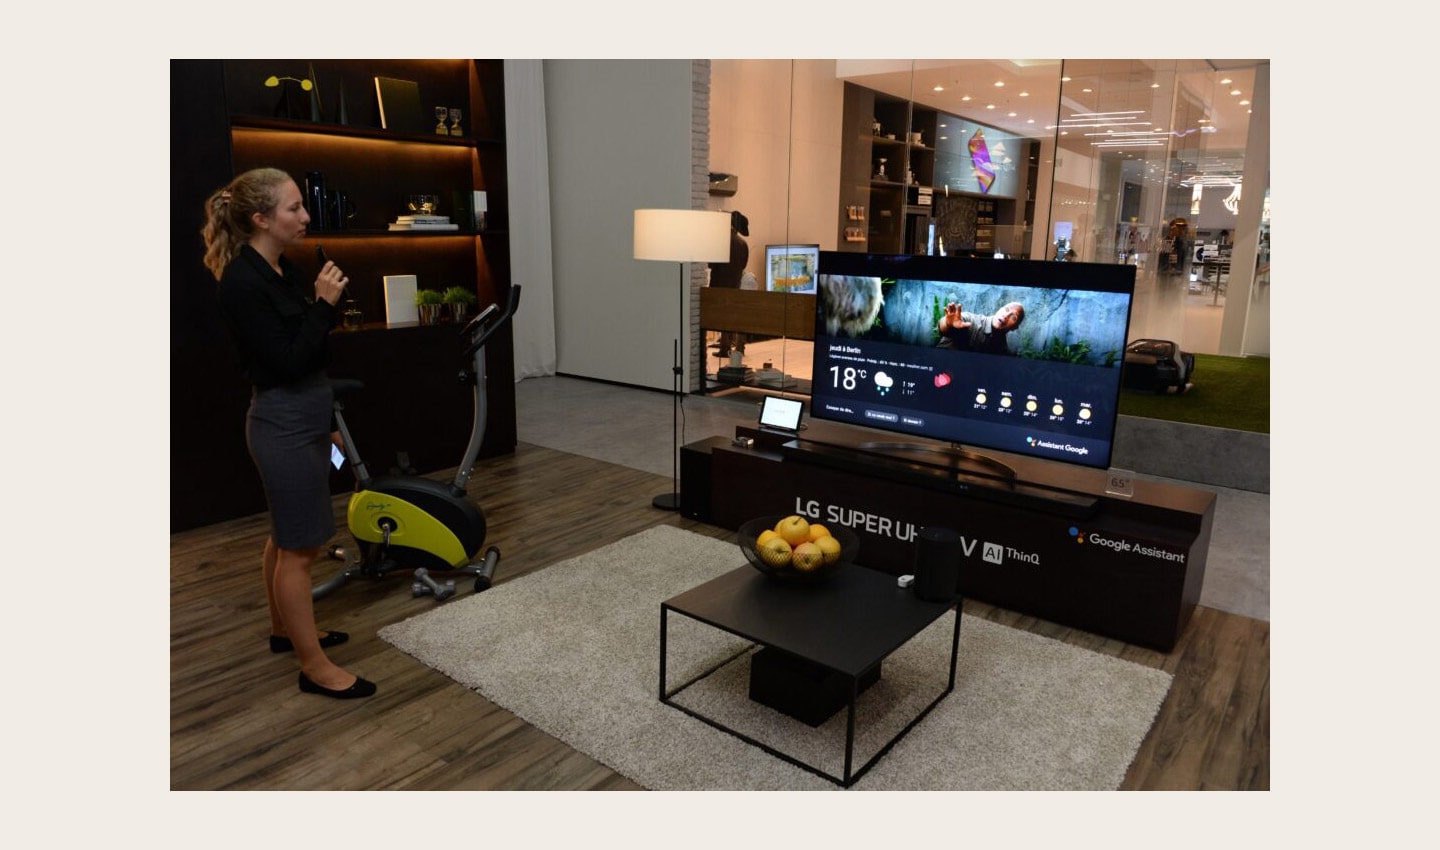 A female attendant holding the Magic Remote stands next to the LG SUPER UHD TV AI ThinQ with Google Assistant to try out the AI voice assistant feature.